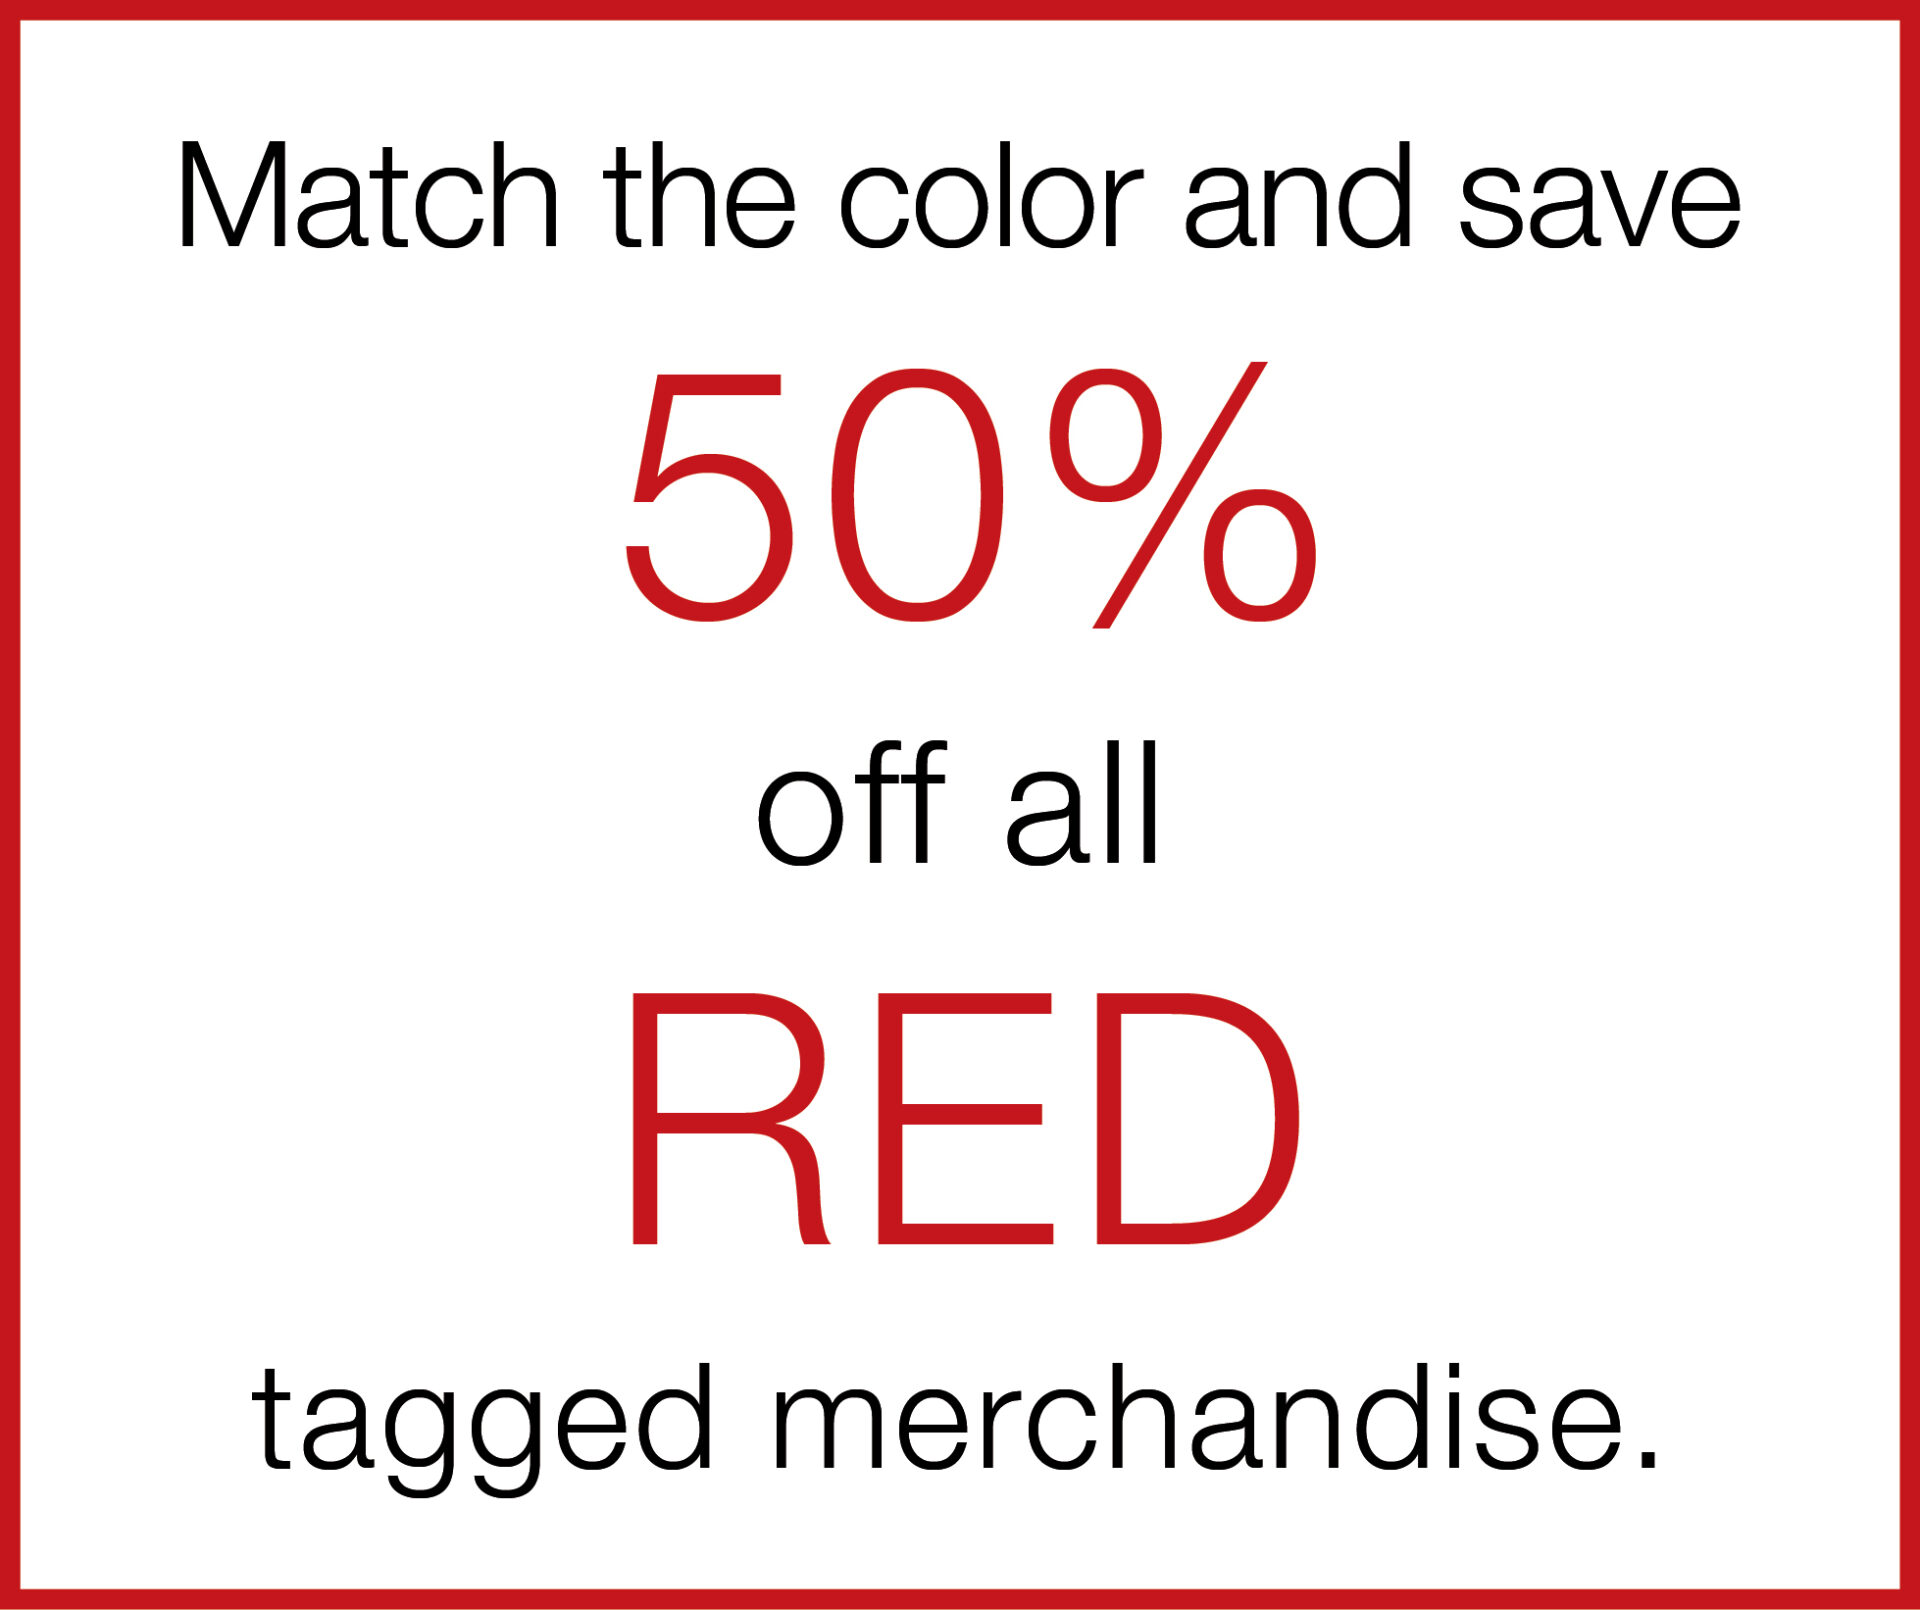 50% off all Red tags